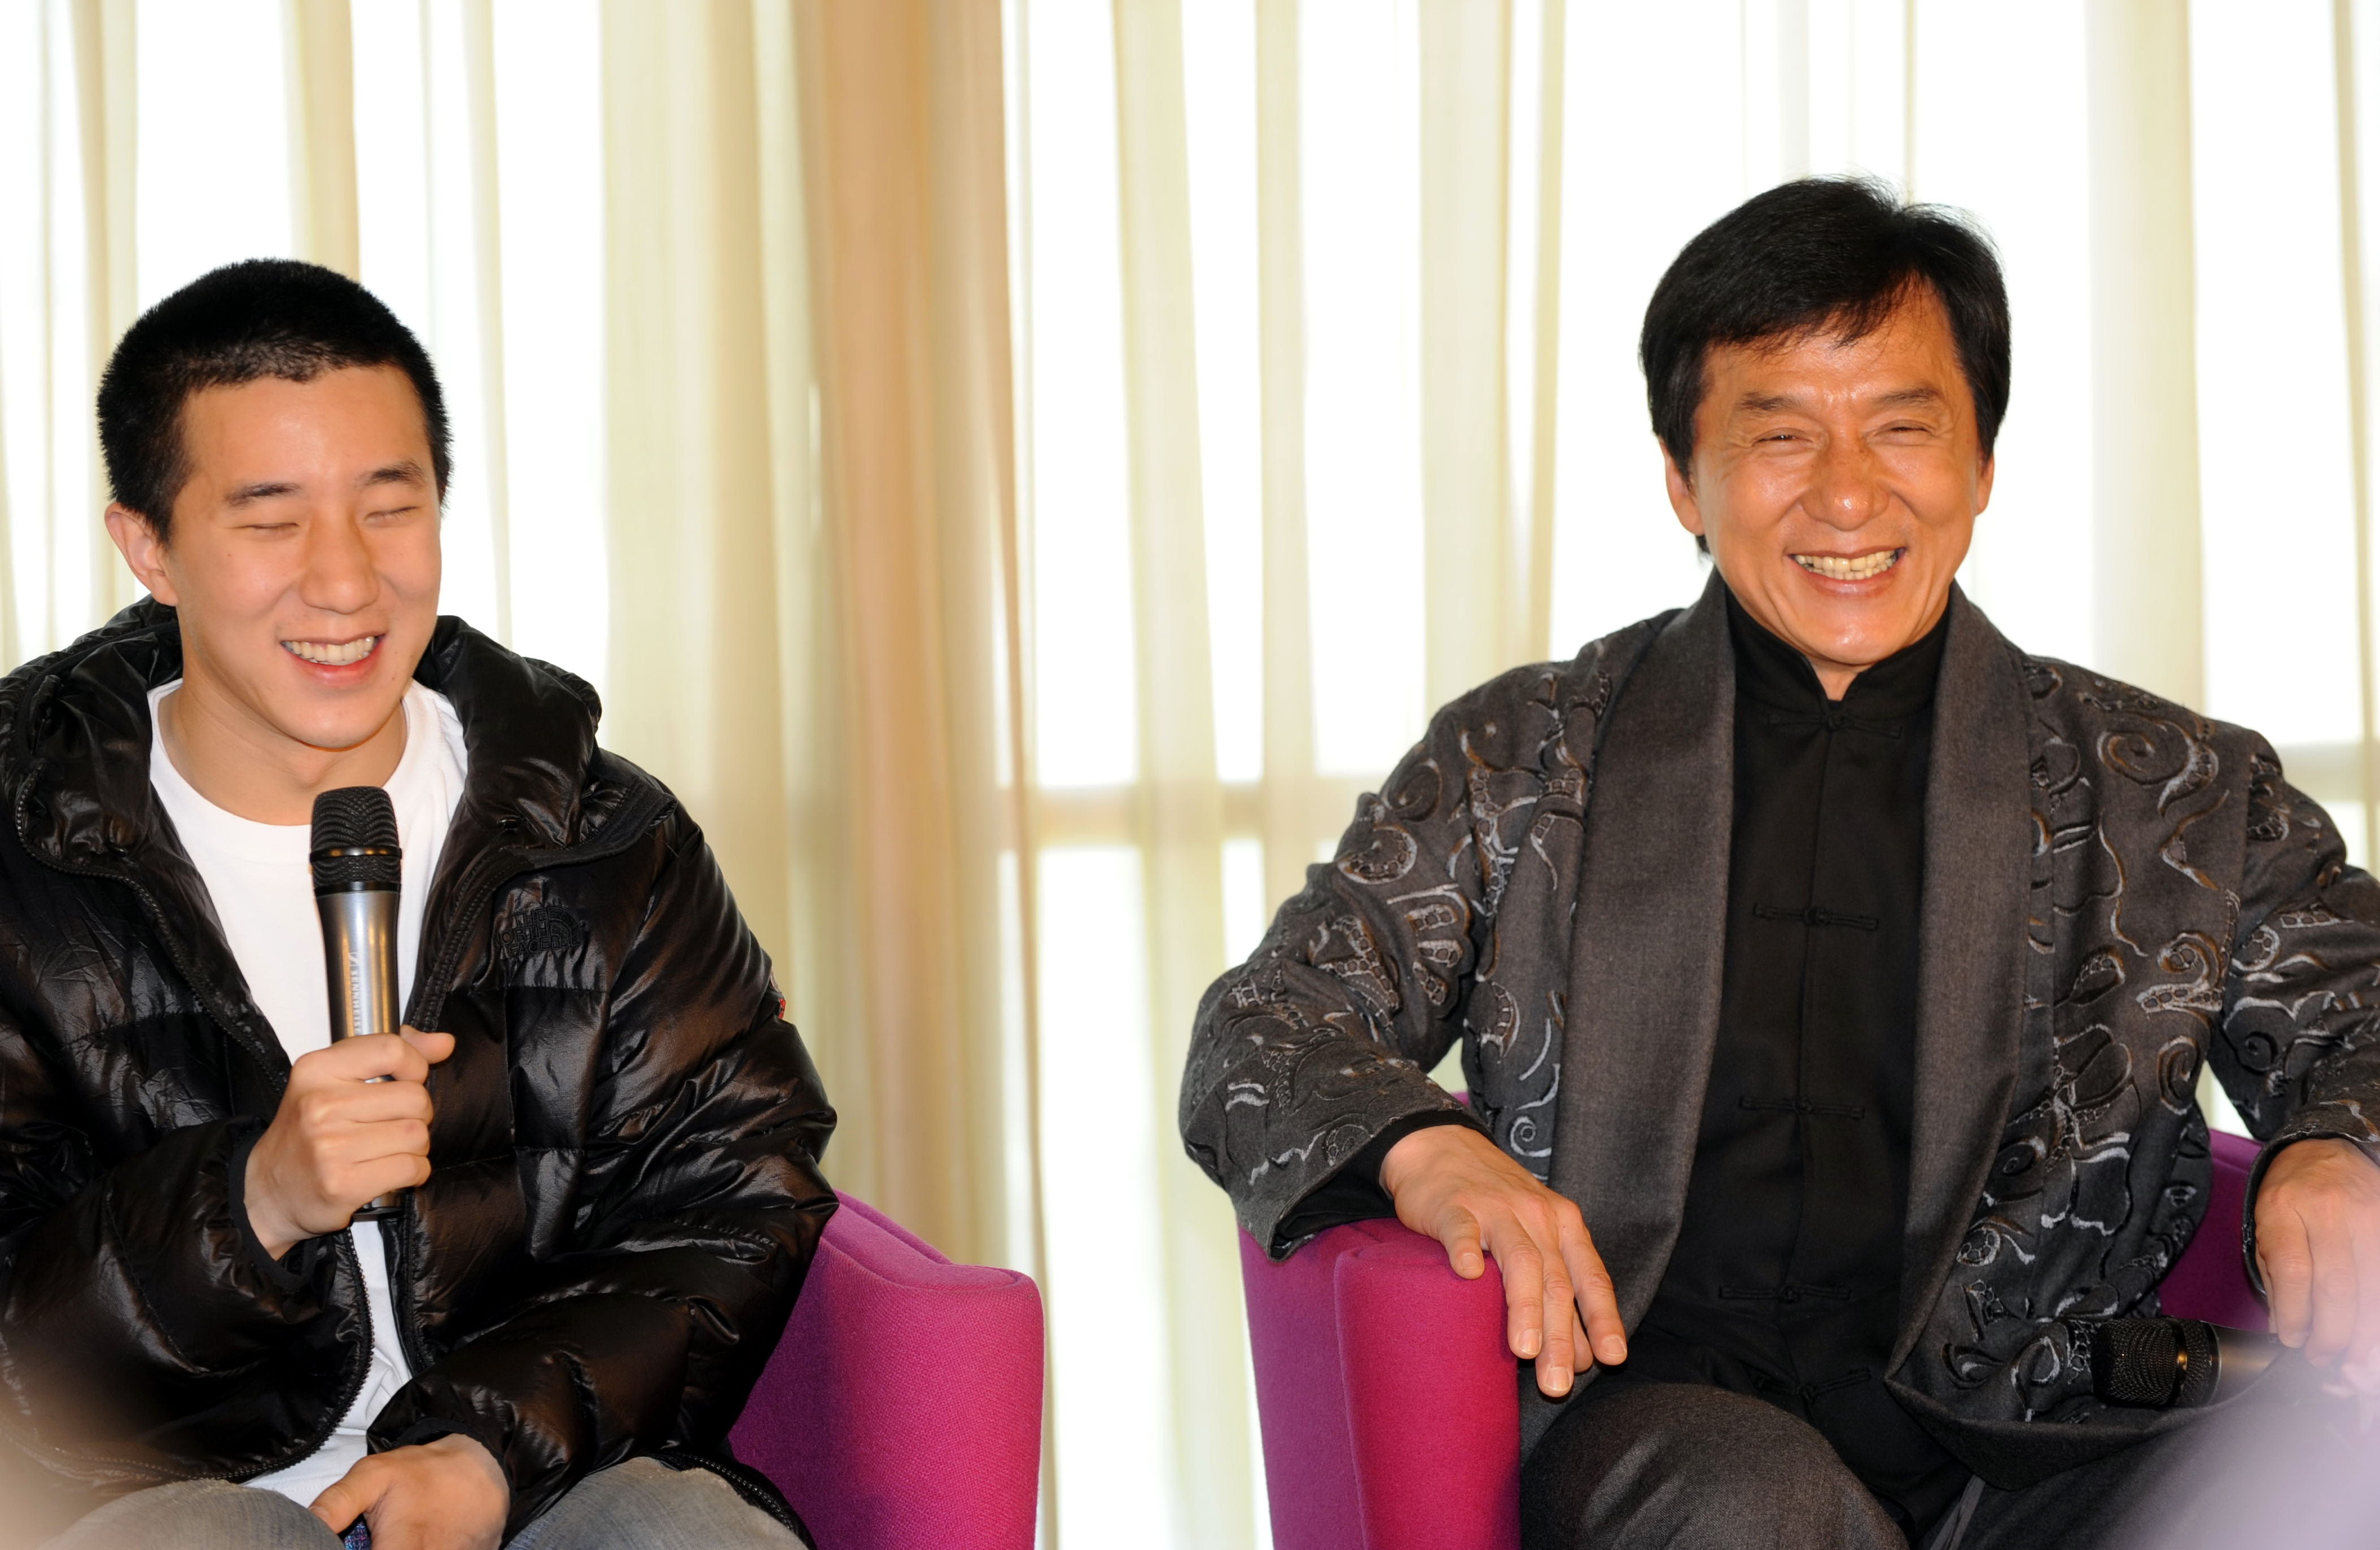 Jackie Chan and his son Jaycee Chan at a press conference announcing a concert at the Bird's Nest Stadium on April 1, 2009, in Beijing, China | Source: Getty Images